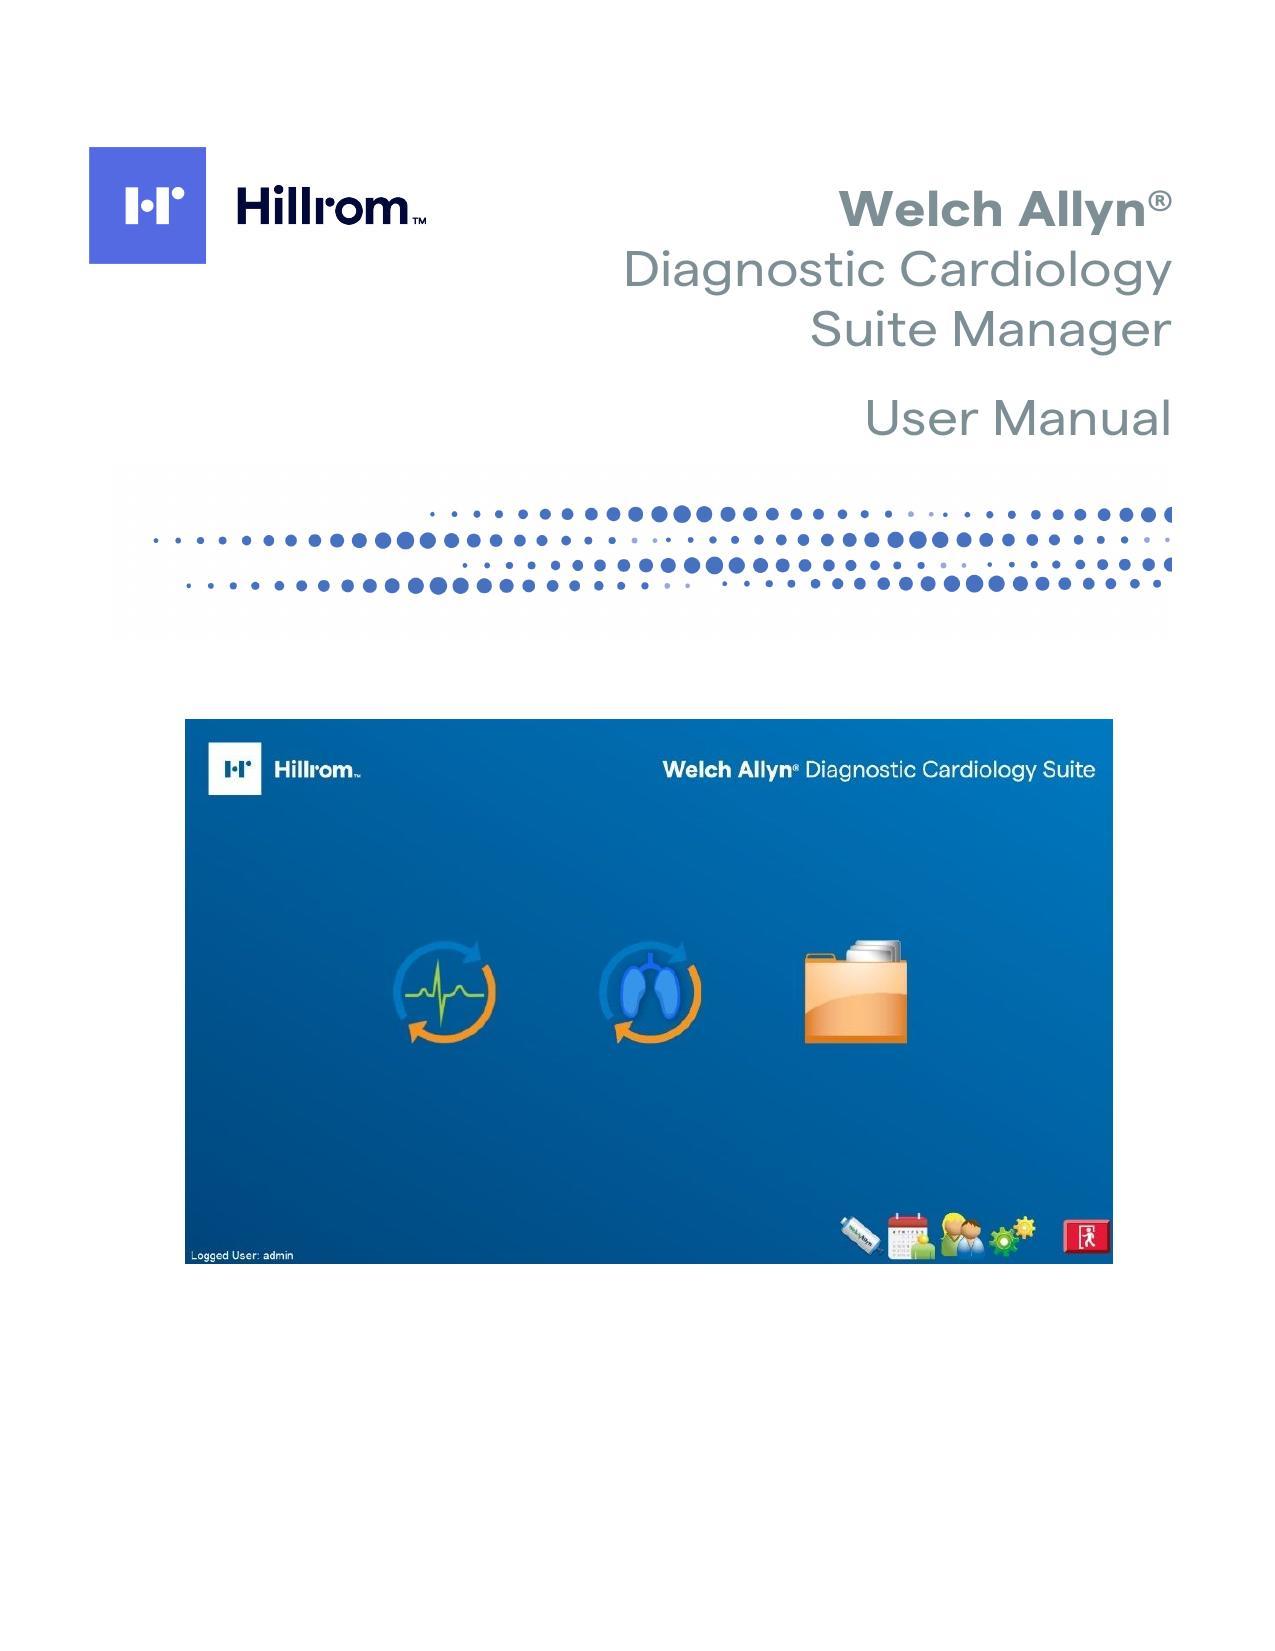 hillrom-welch-allyn-diagnostic-cardiology-suite-manager-user-manual.pdf